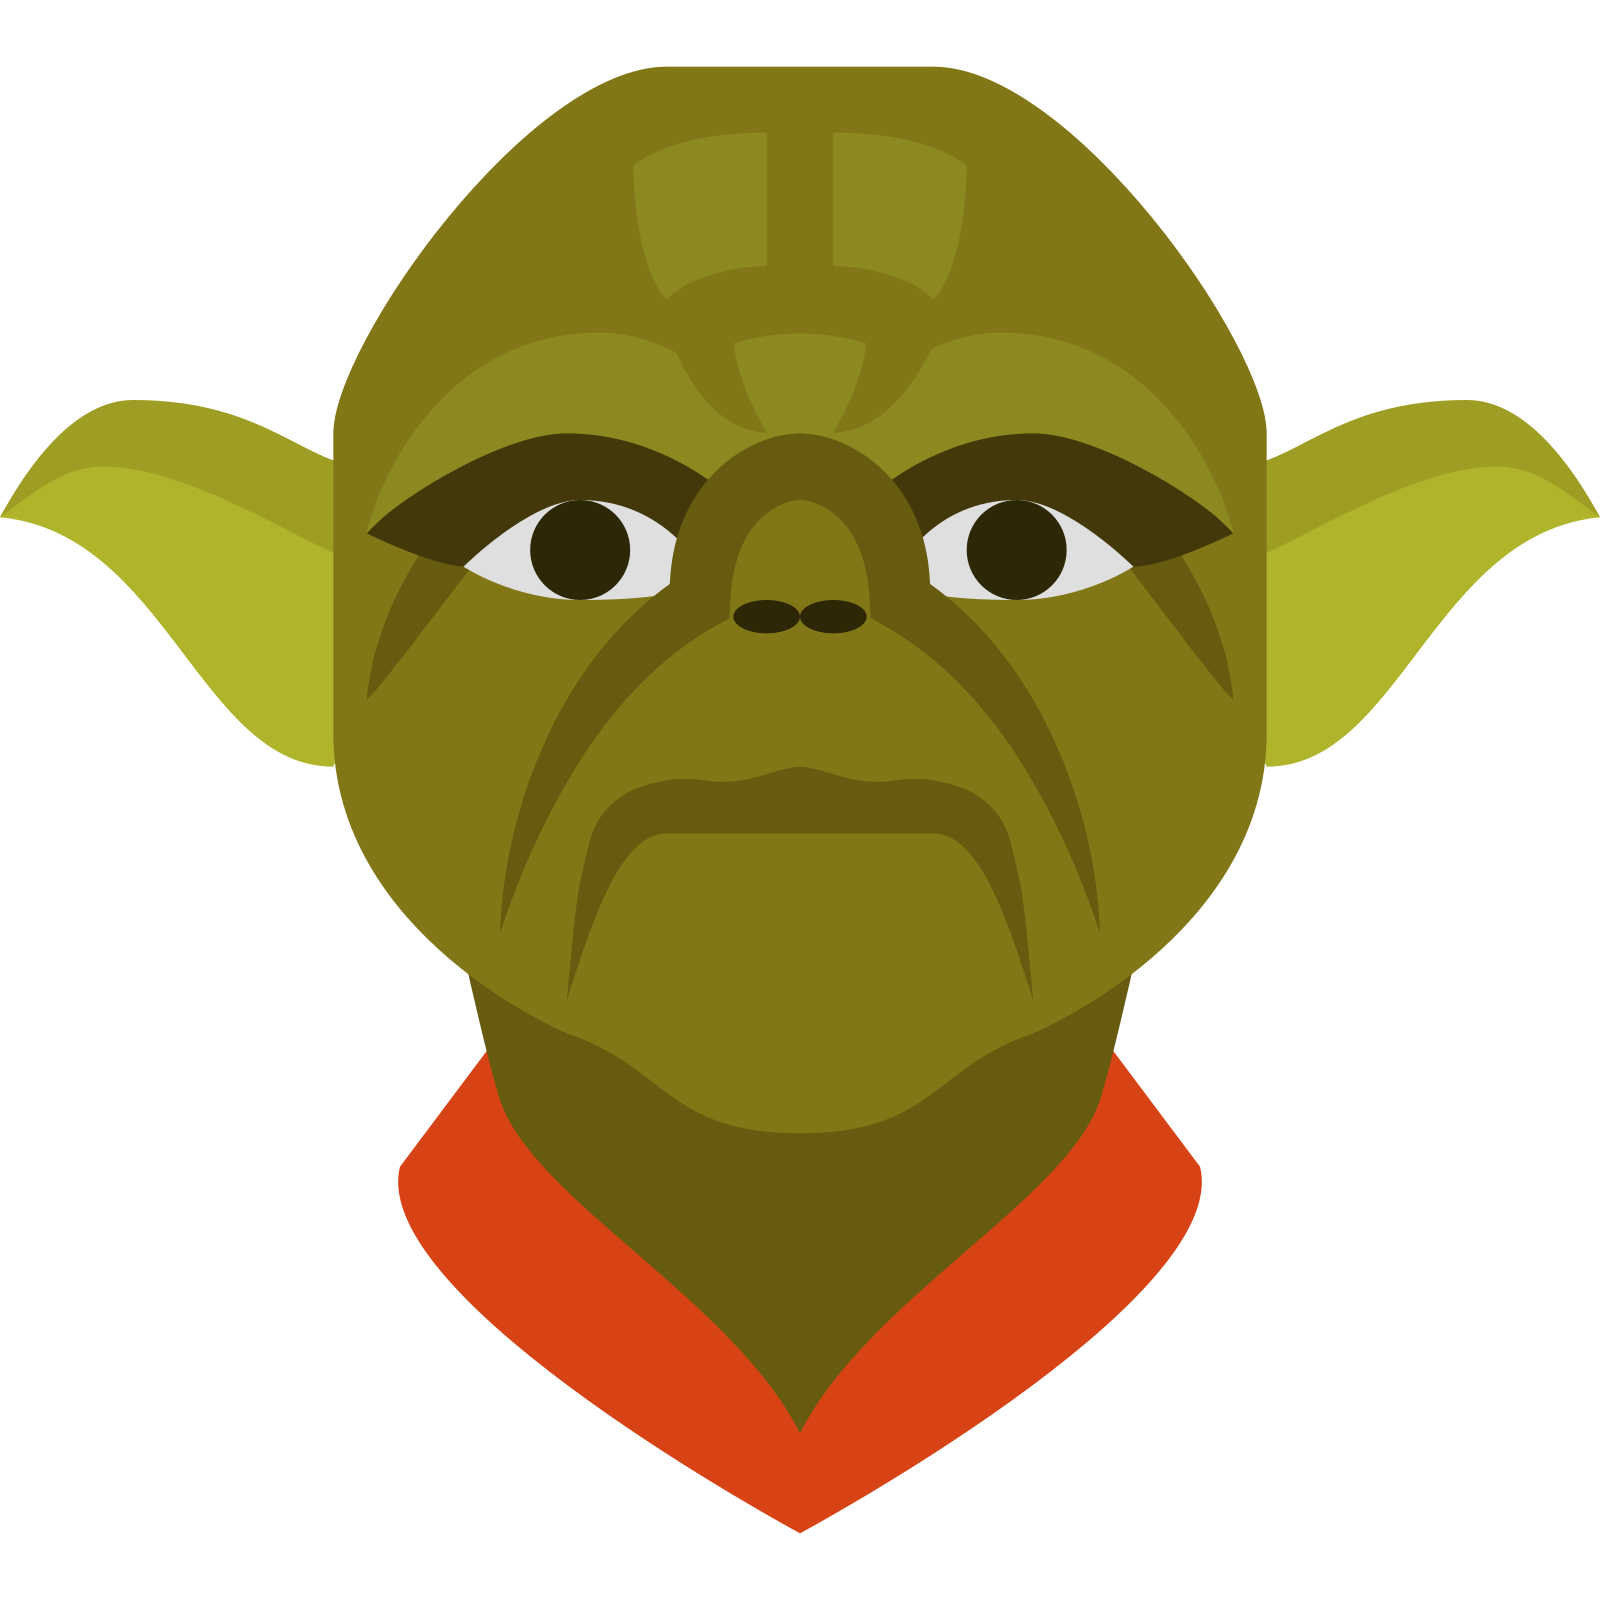 Download Yoda Icon - free download, PNG and vector